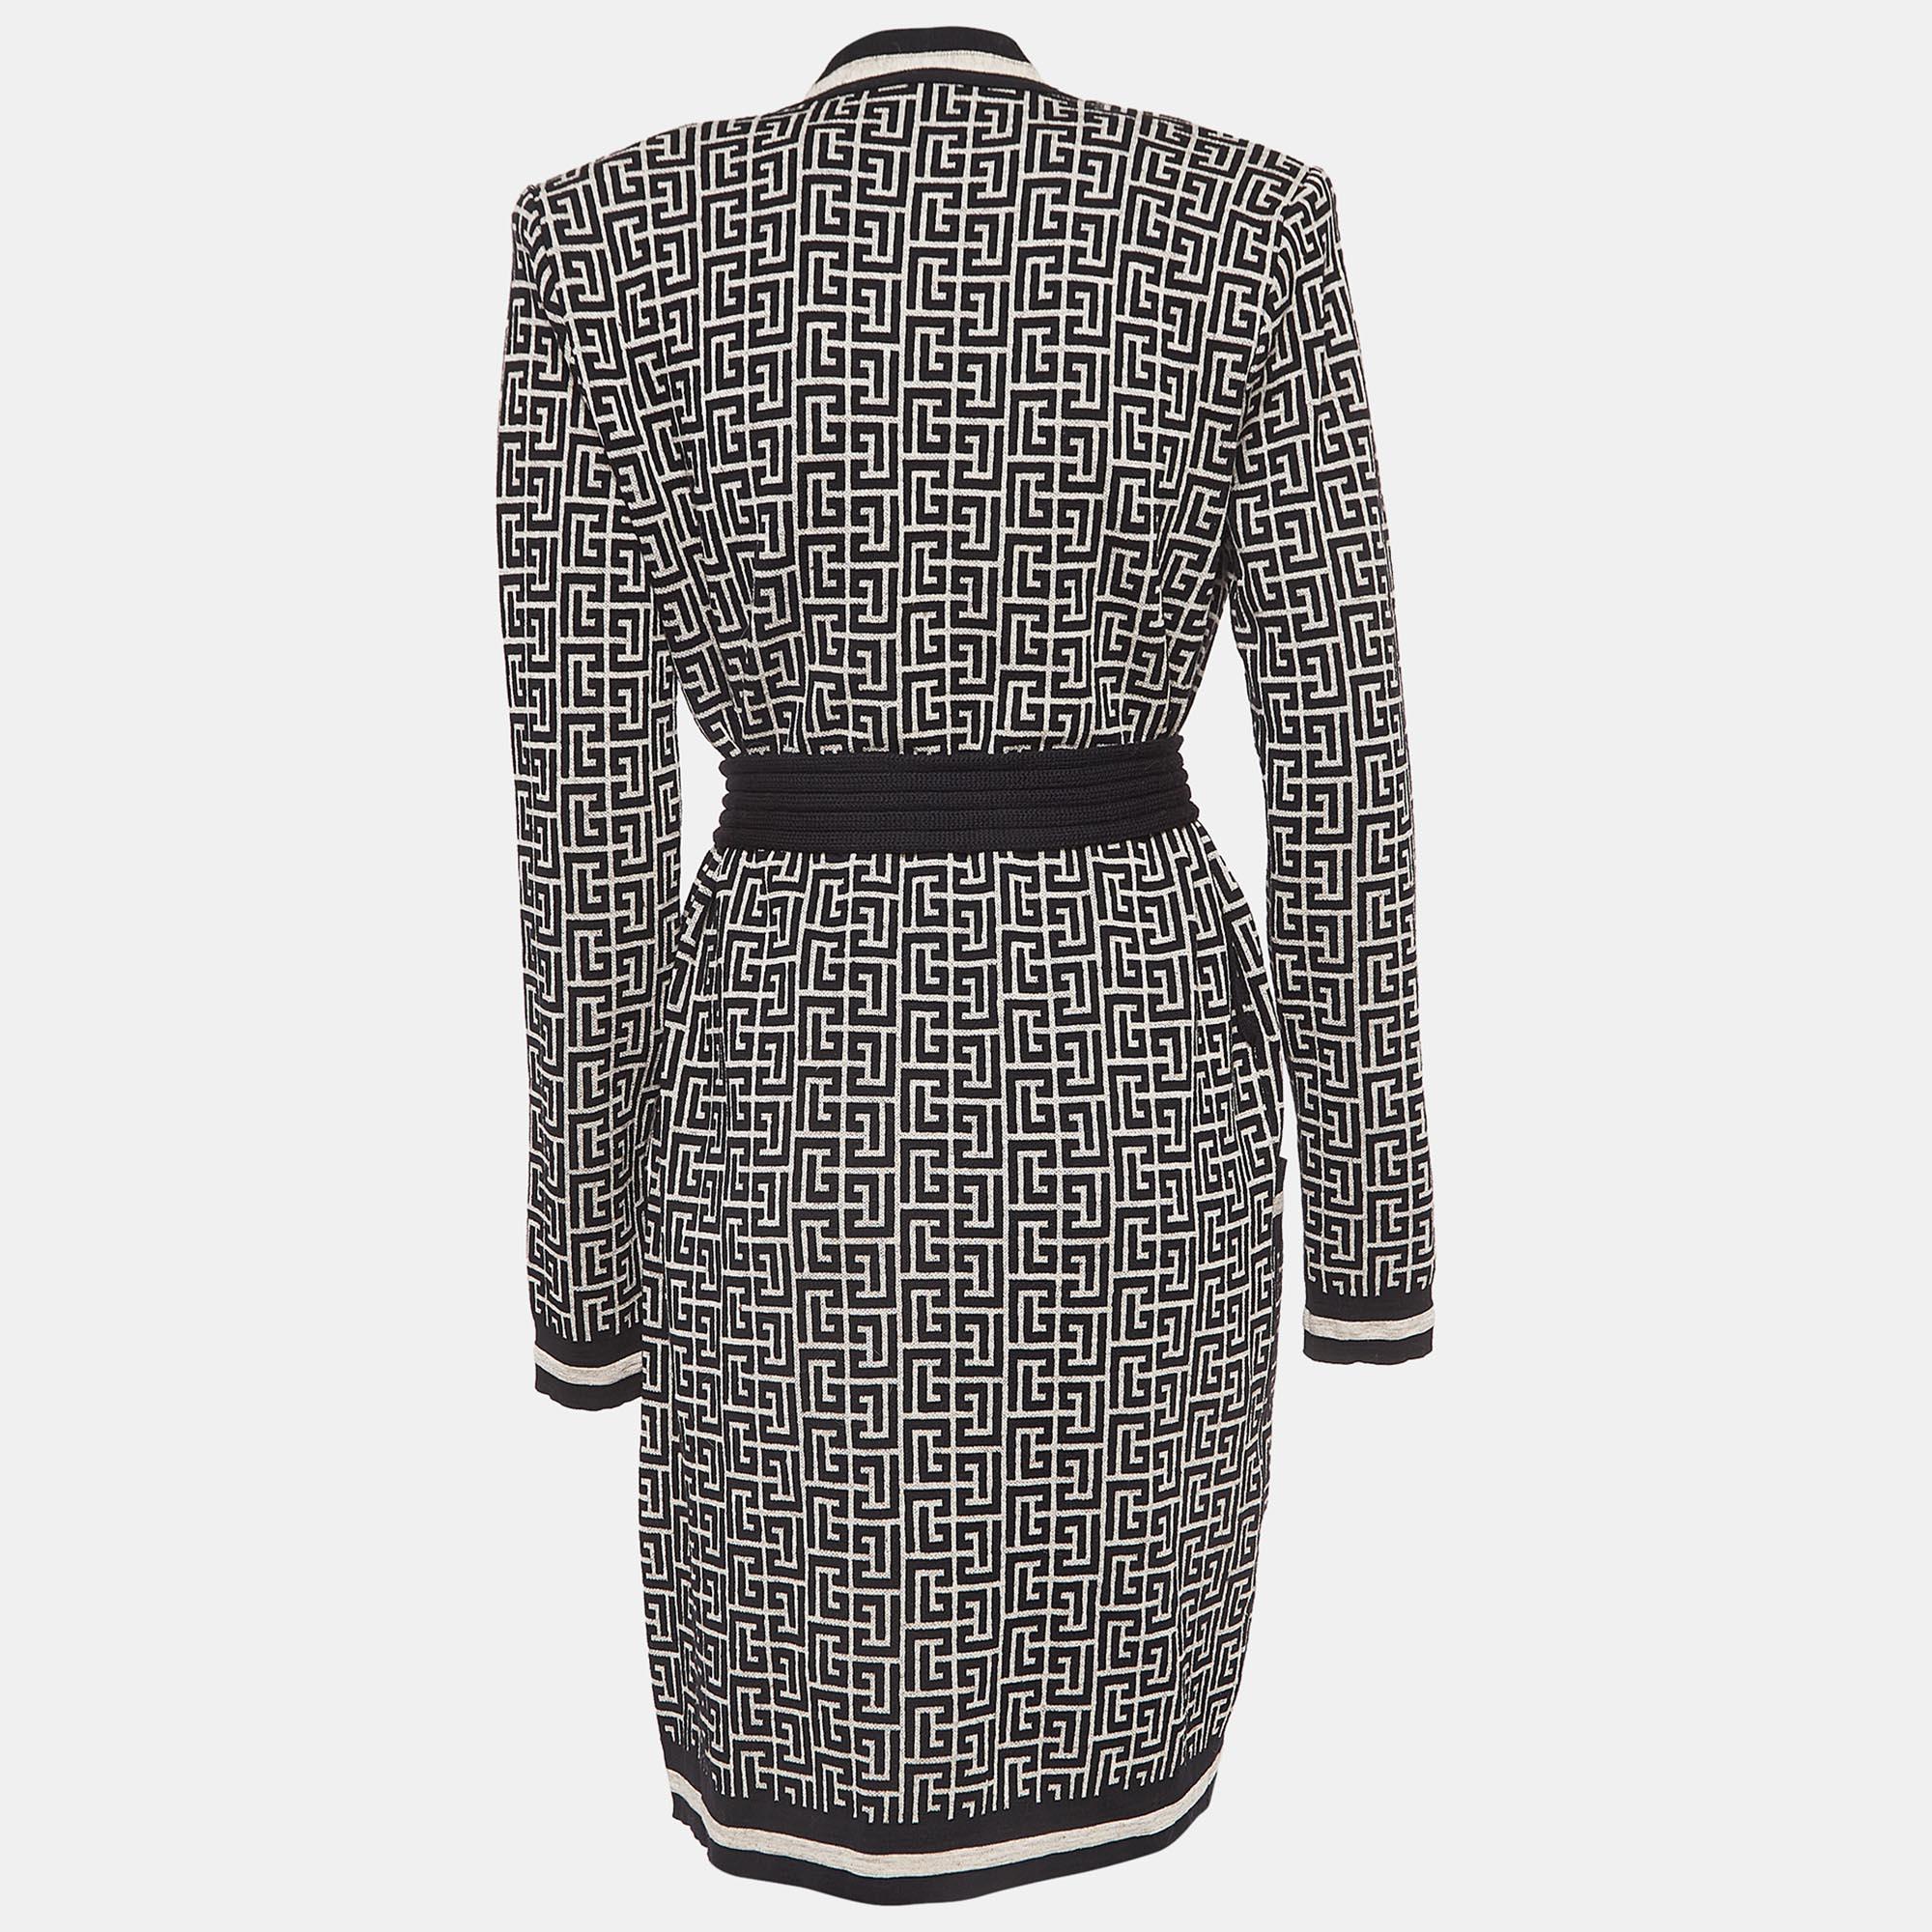 Crafted with precision, the Balmain cardigan embodies effortless refinement. Its intricate monogram jacquard weave exudes timeless charm, while the belted waist offers a flattering silhouette. Luxurious comfort meets understated chic in this